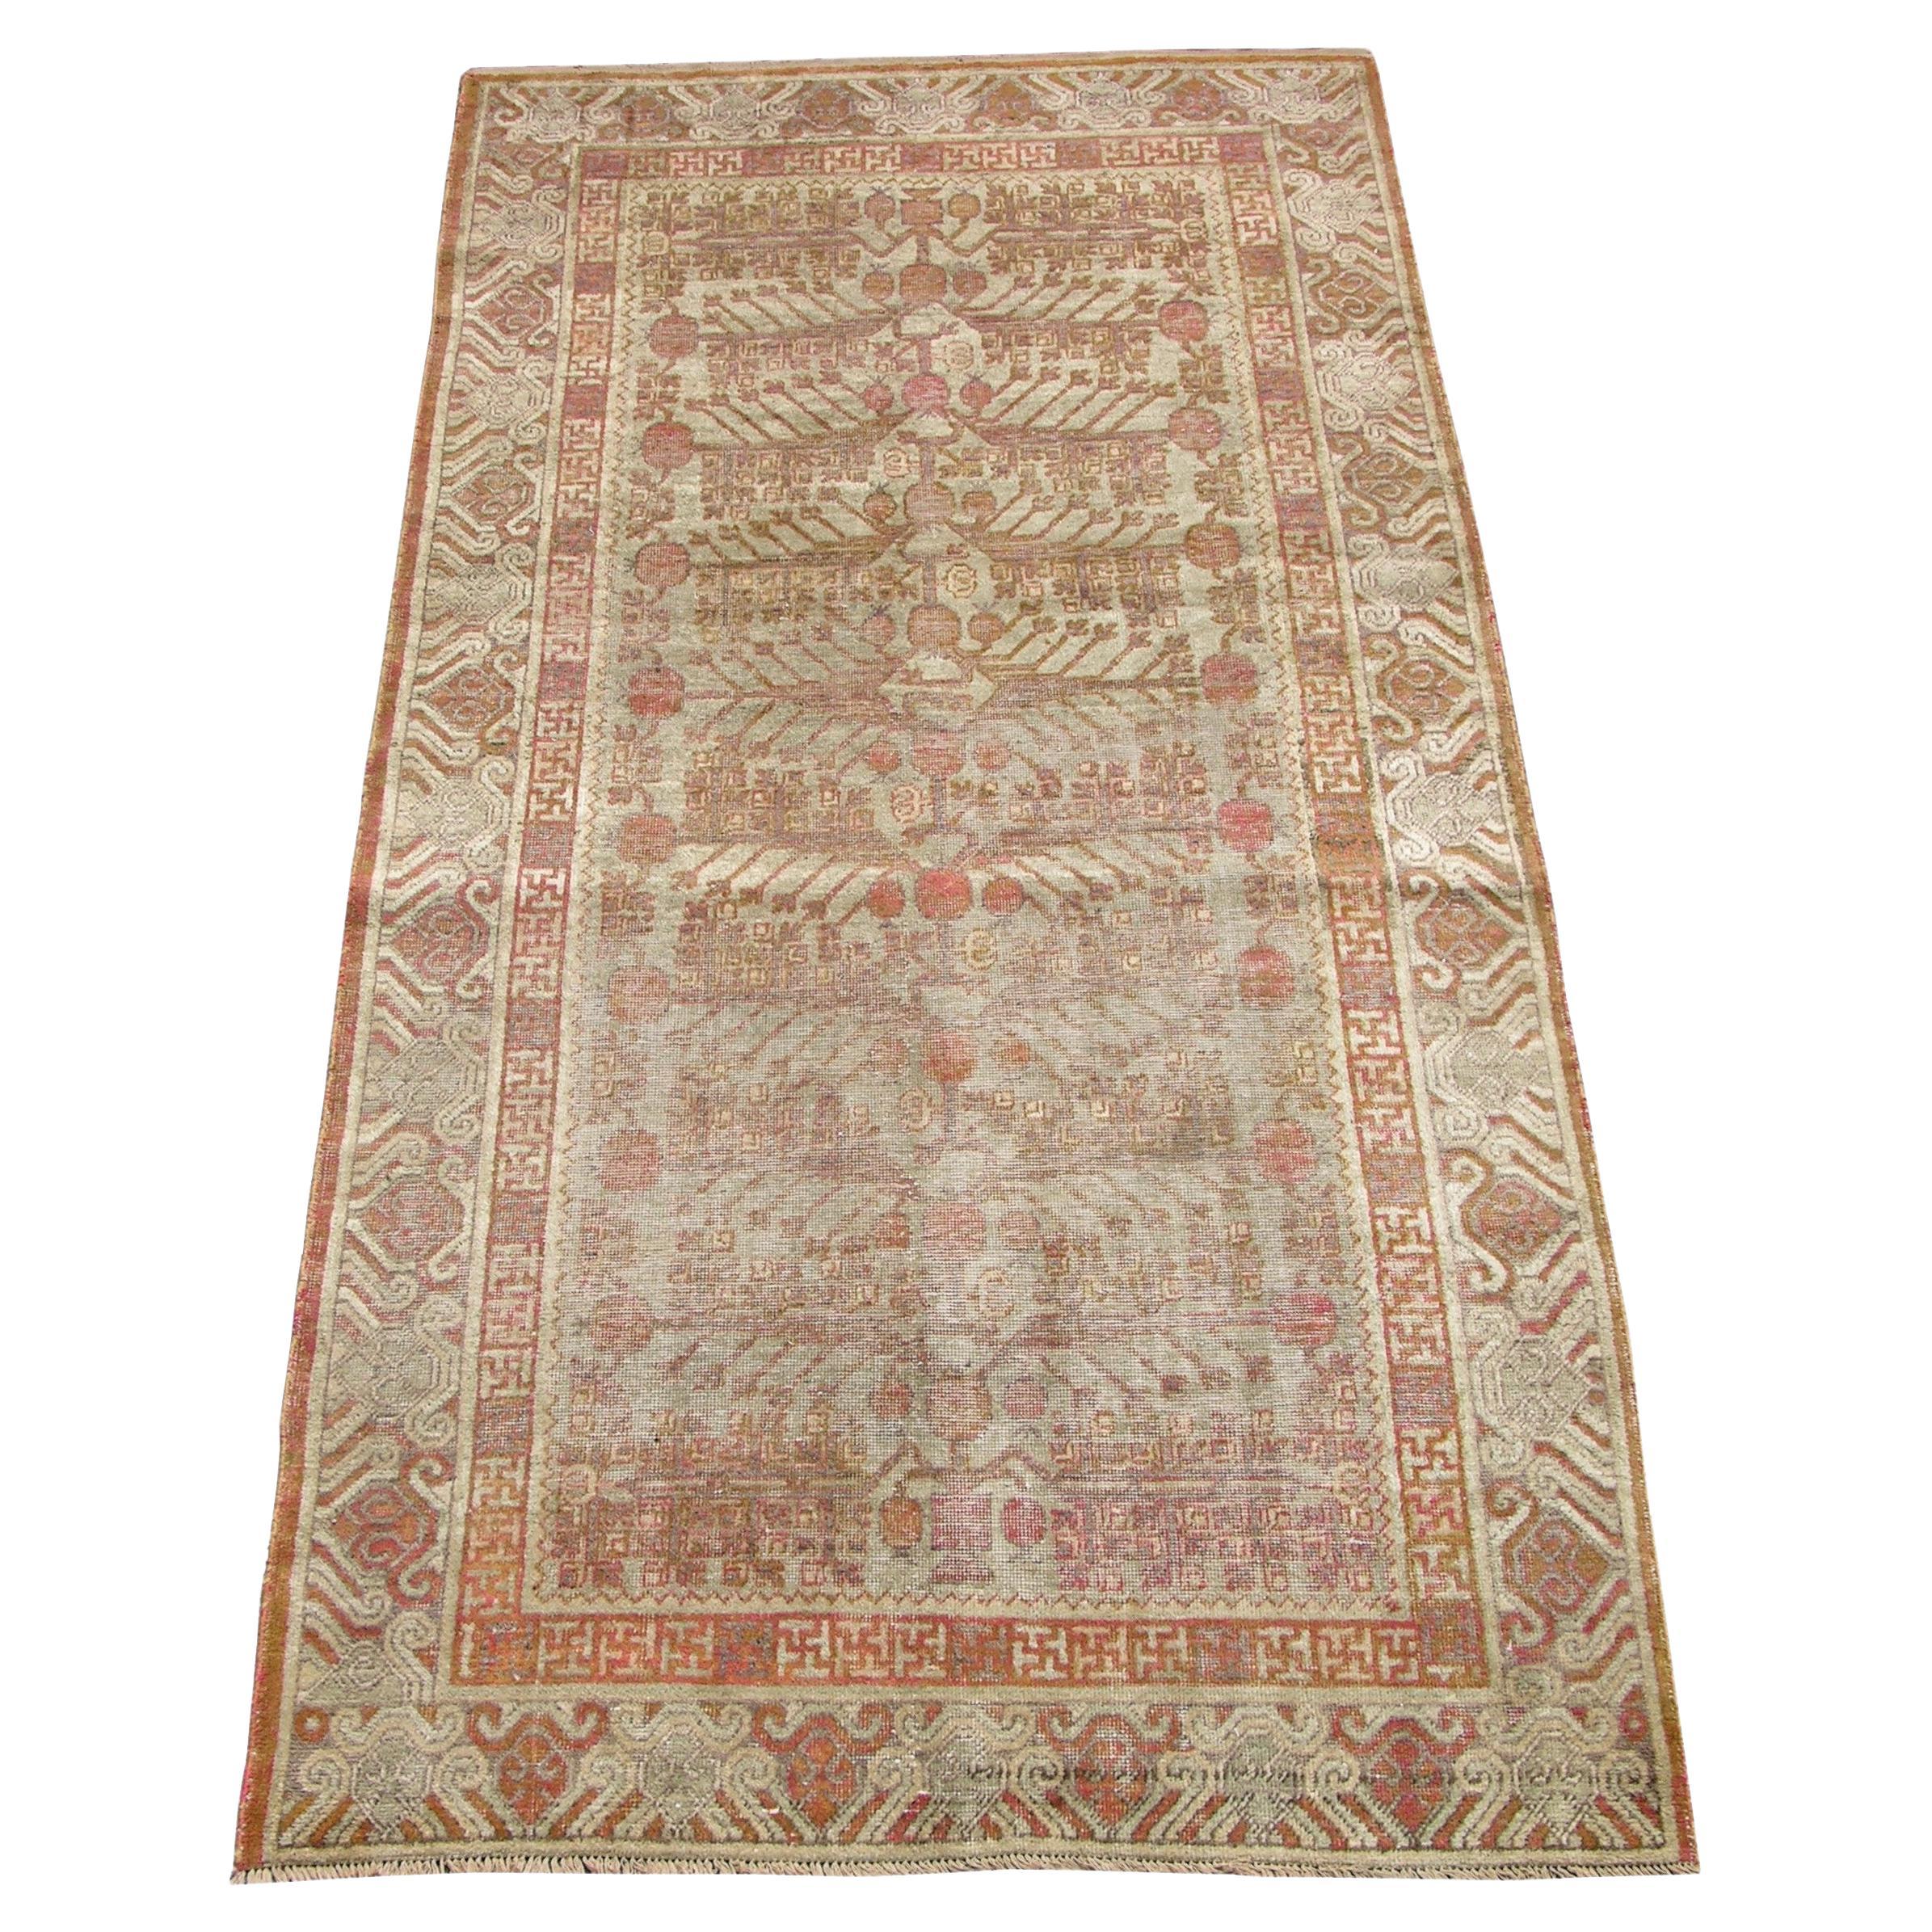 1900s Century Antique Samarkand Rug 9.9" X 5.0" For Sale